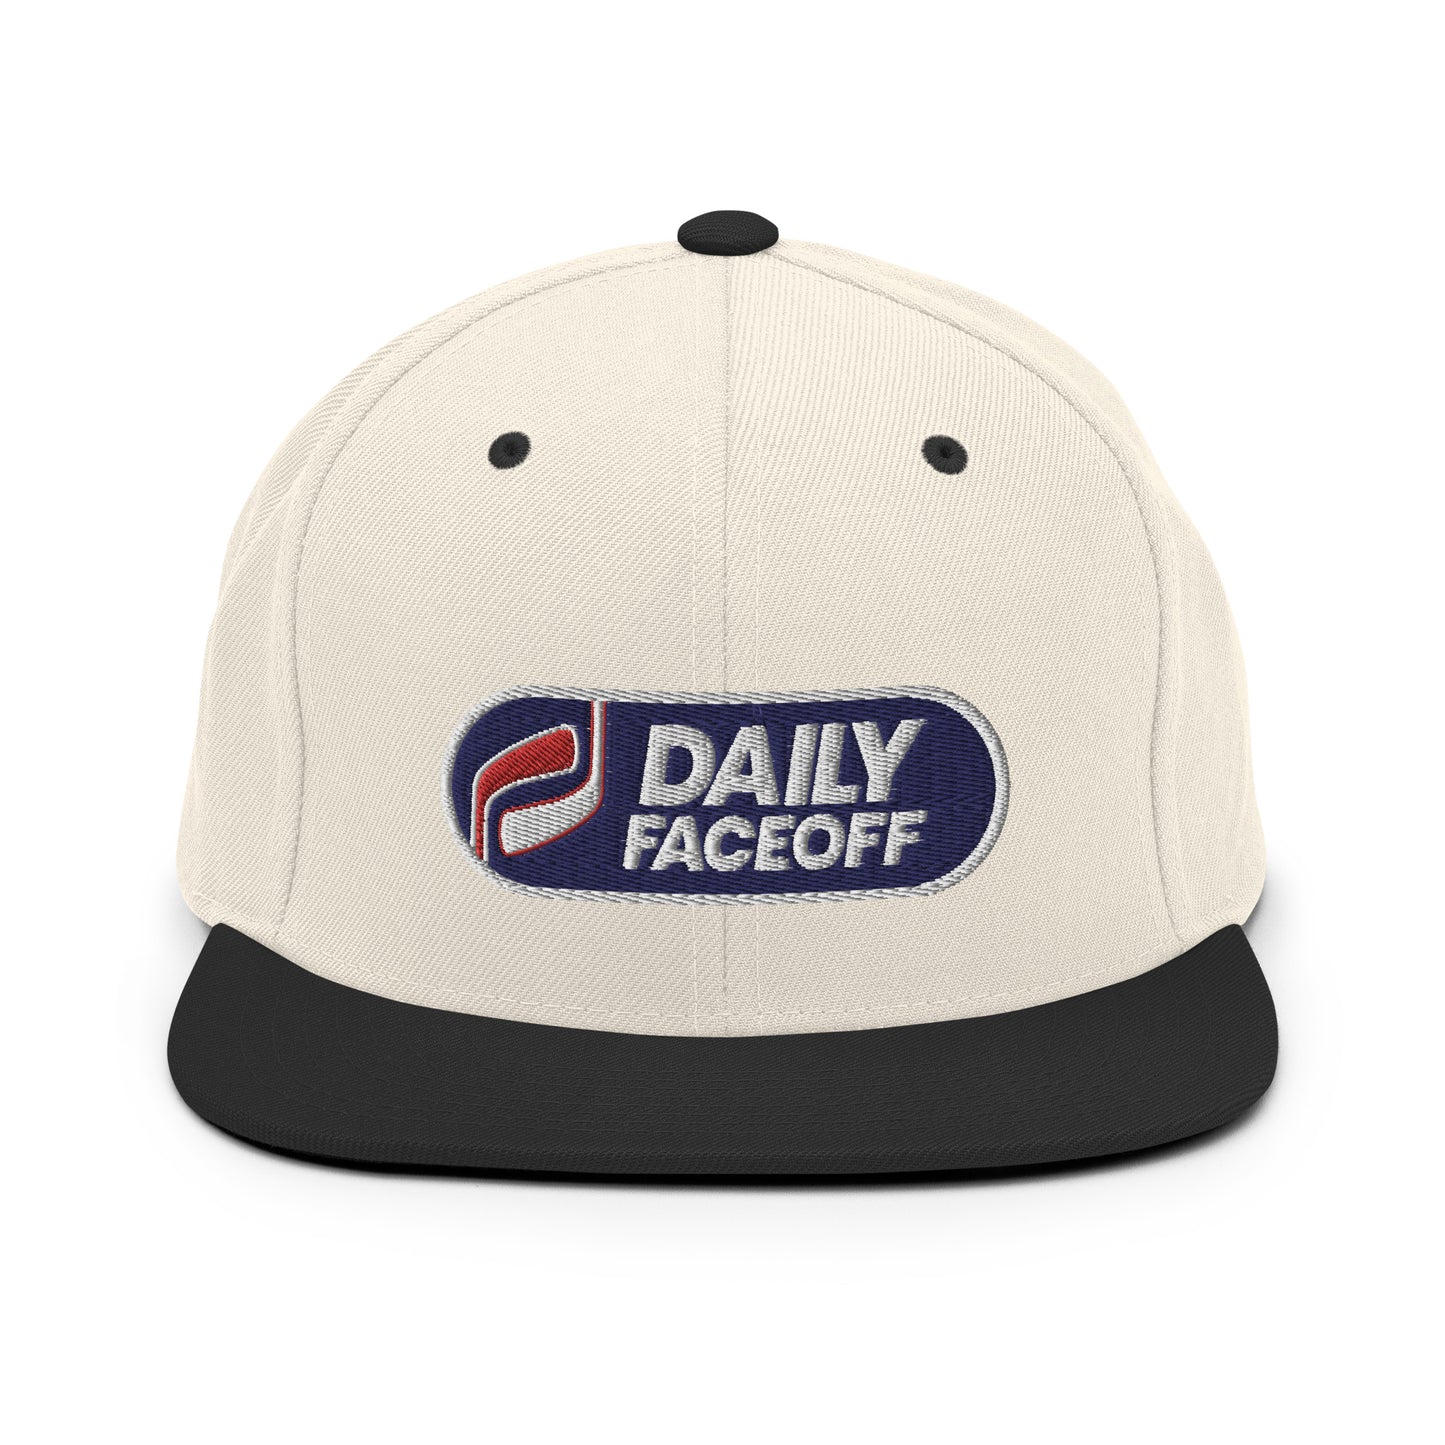 THE CLASSIC - Daily Faceoff Snapback Hat